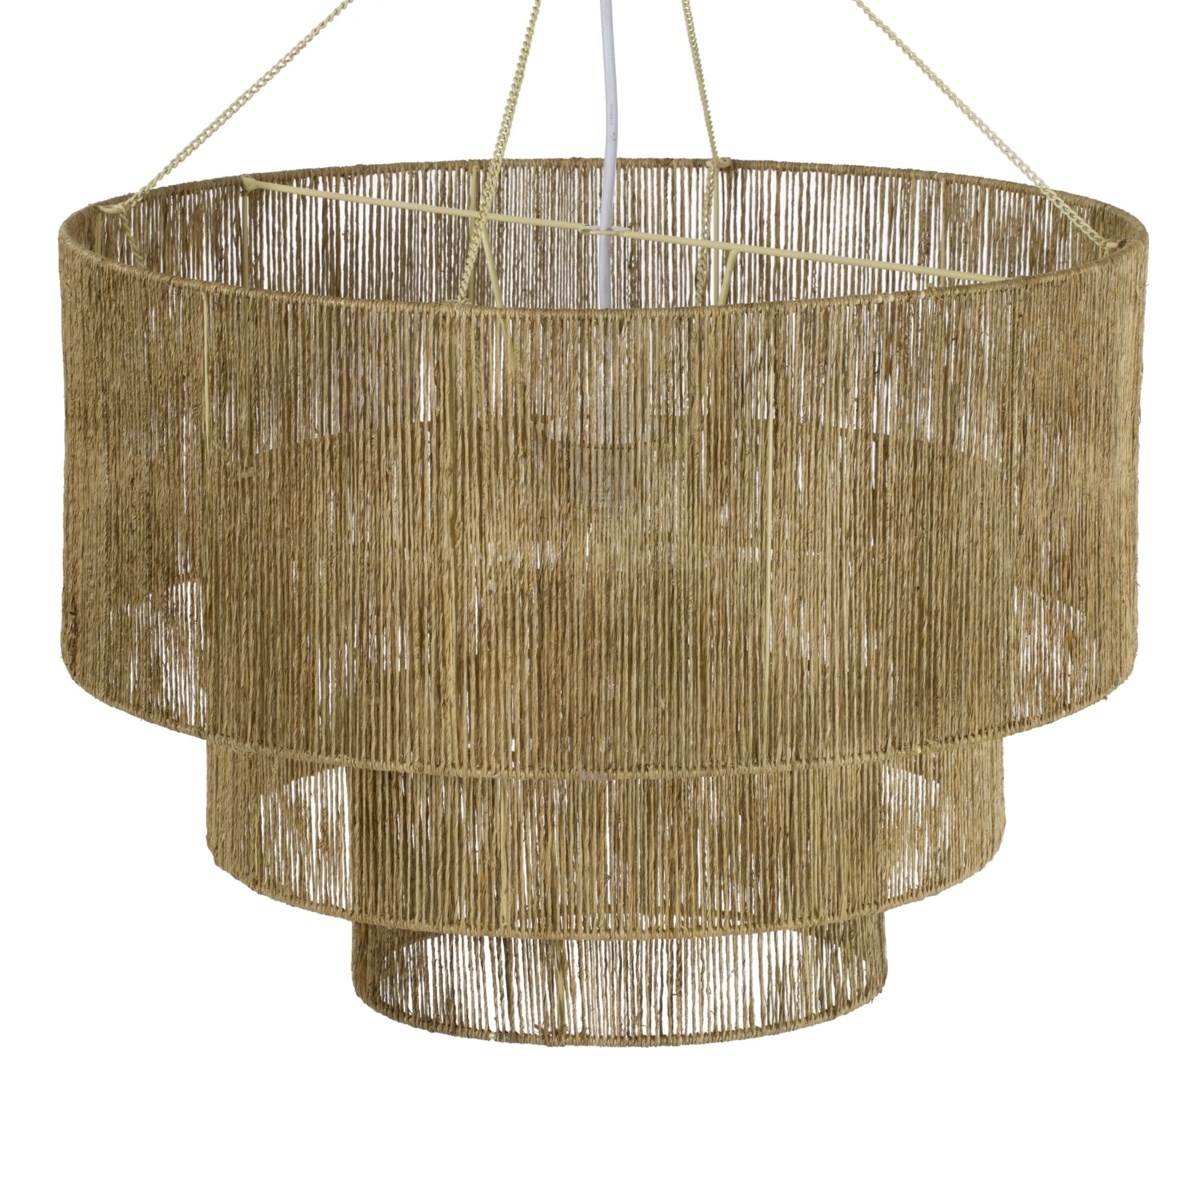 Avery Coastal Beach Natural Brown Jute Rope Wrapped 3 Tier Chandelier - Image 2